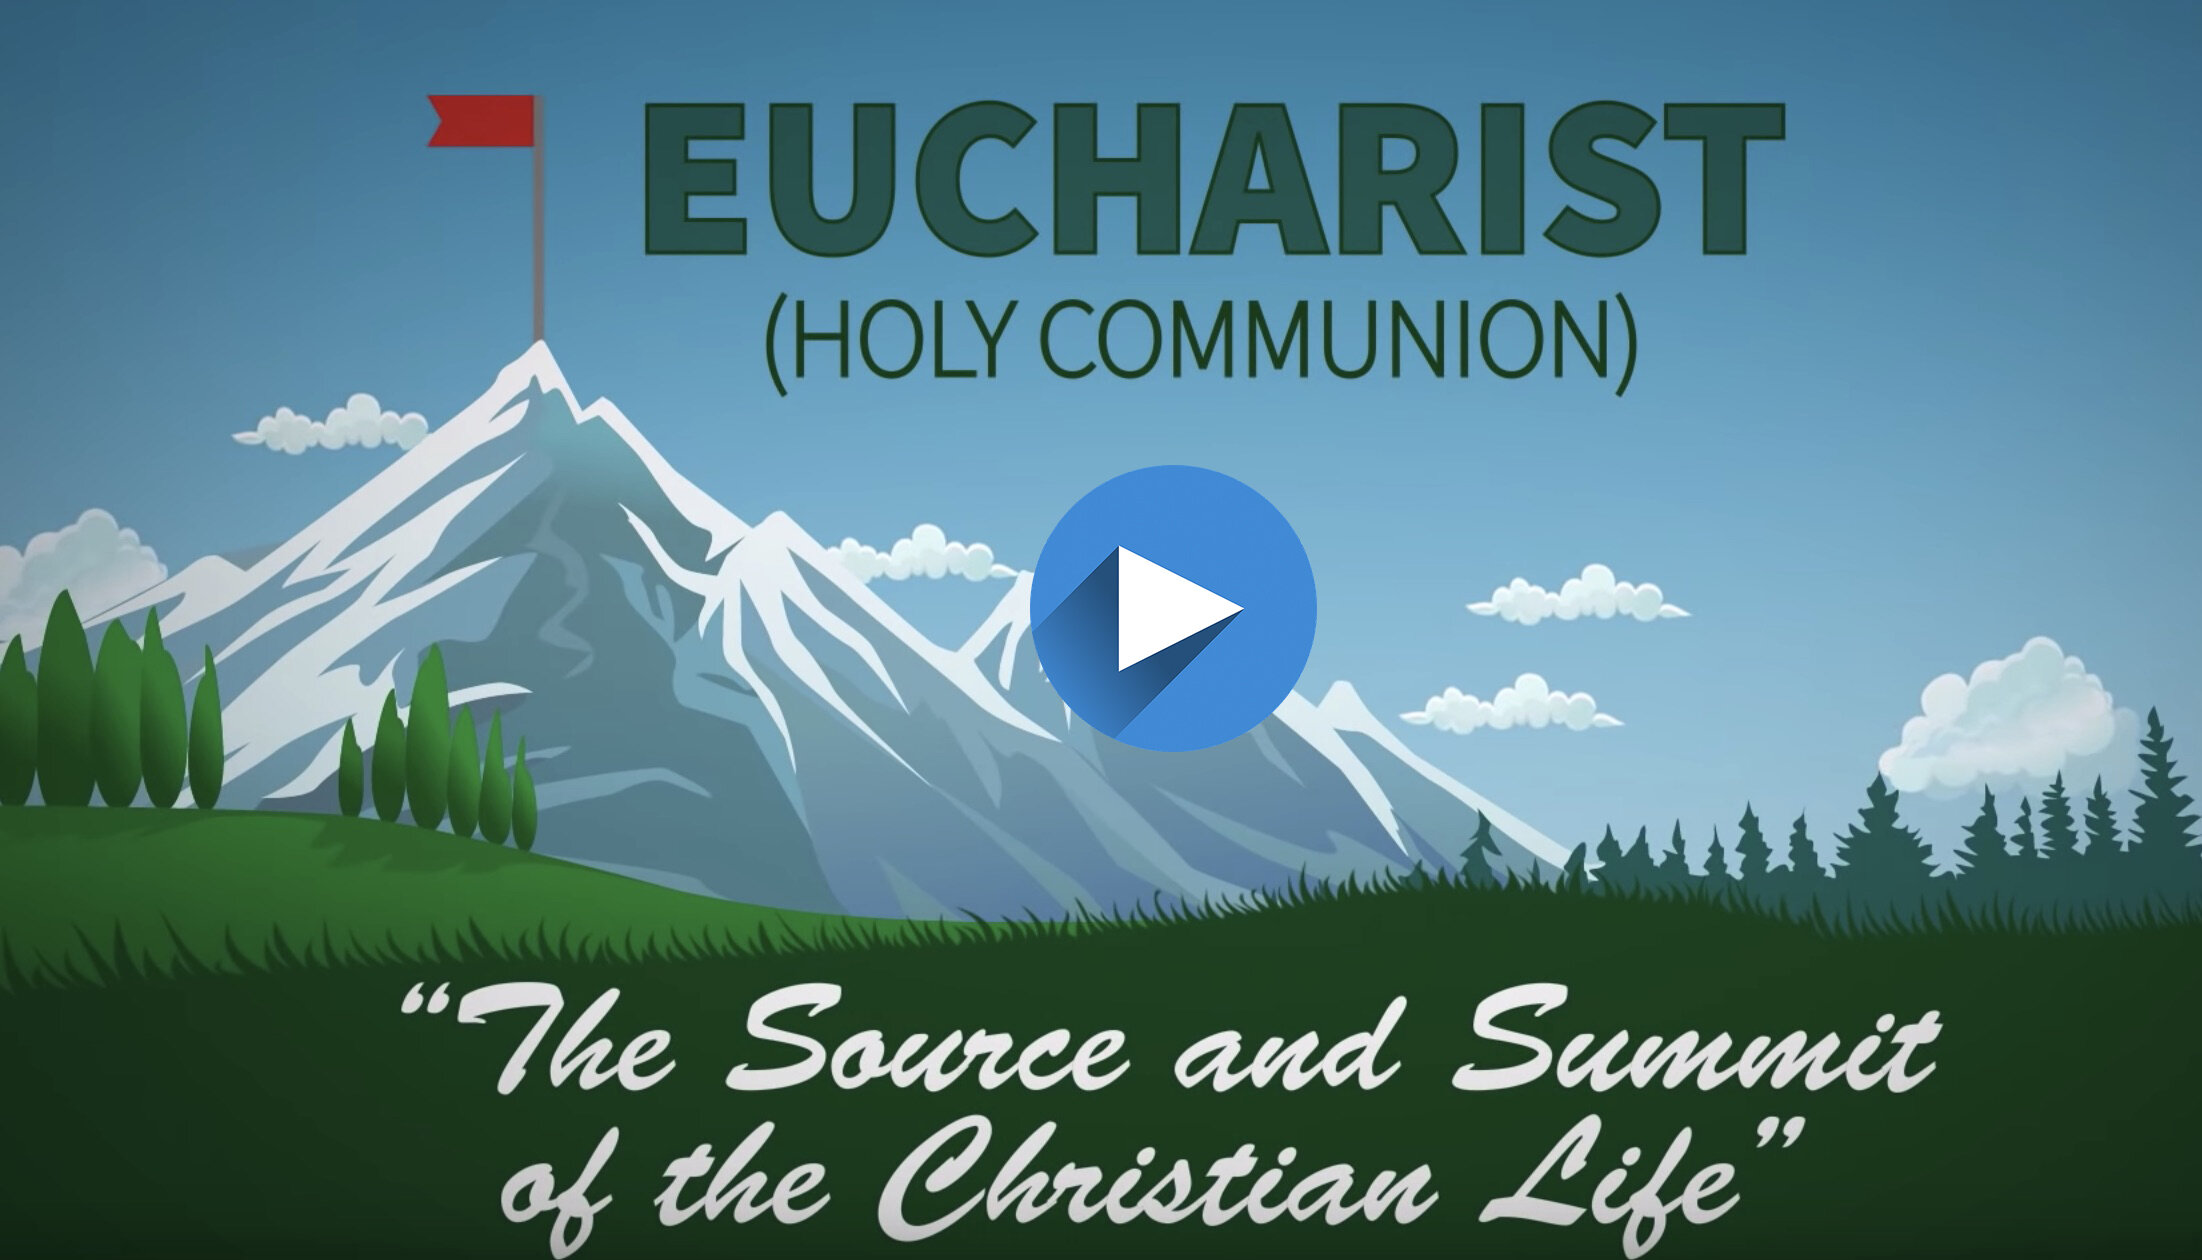 EUCHARIST VIDEO 4 COVER with arrow.jpg